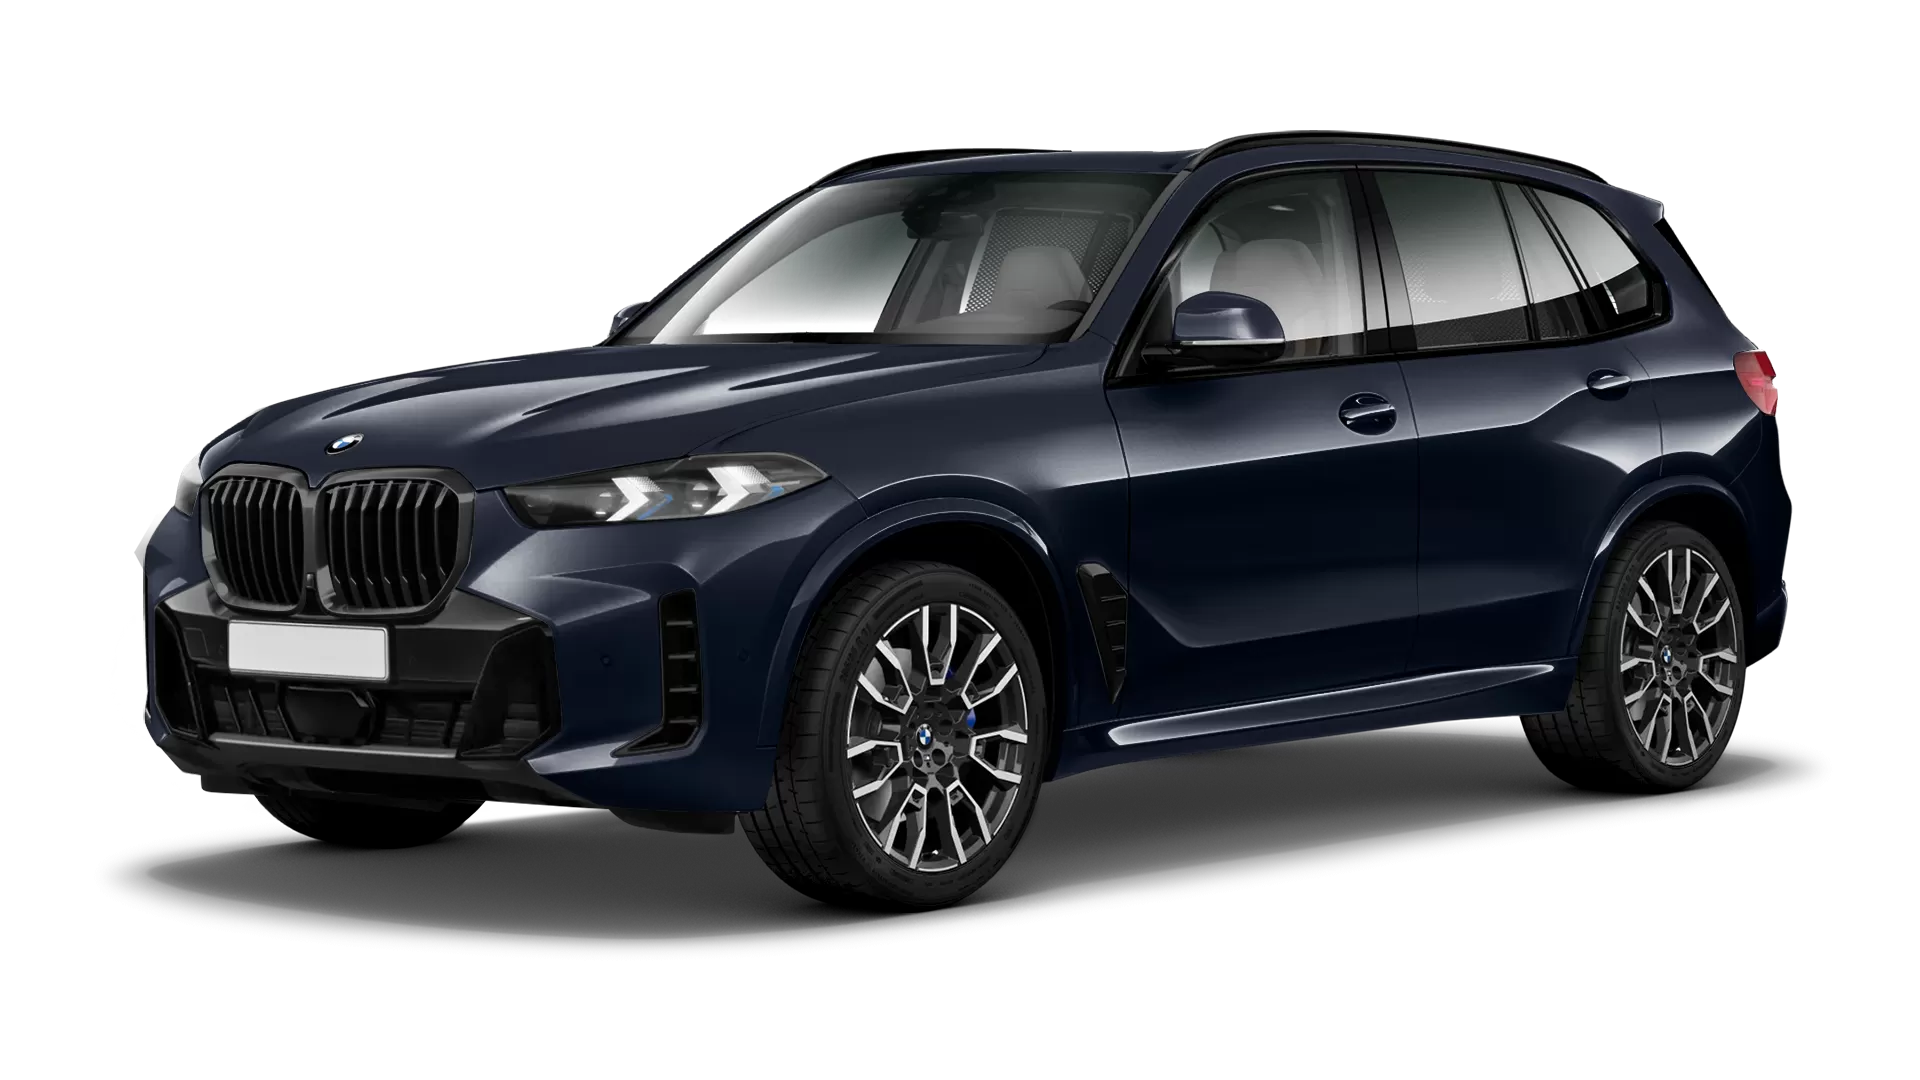 BMW X5 G05 LCI Facelift stock front view in Black Carbon color